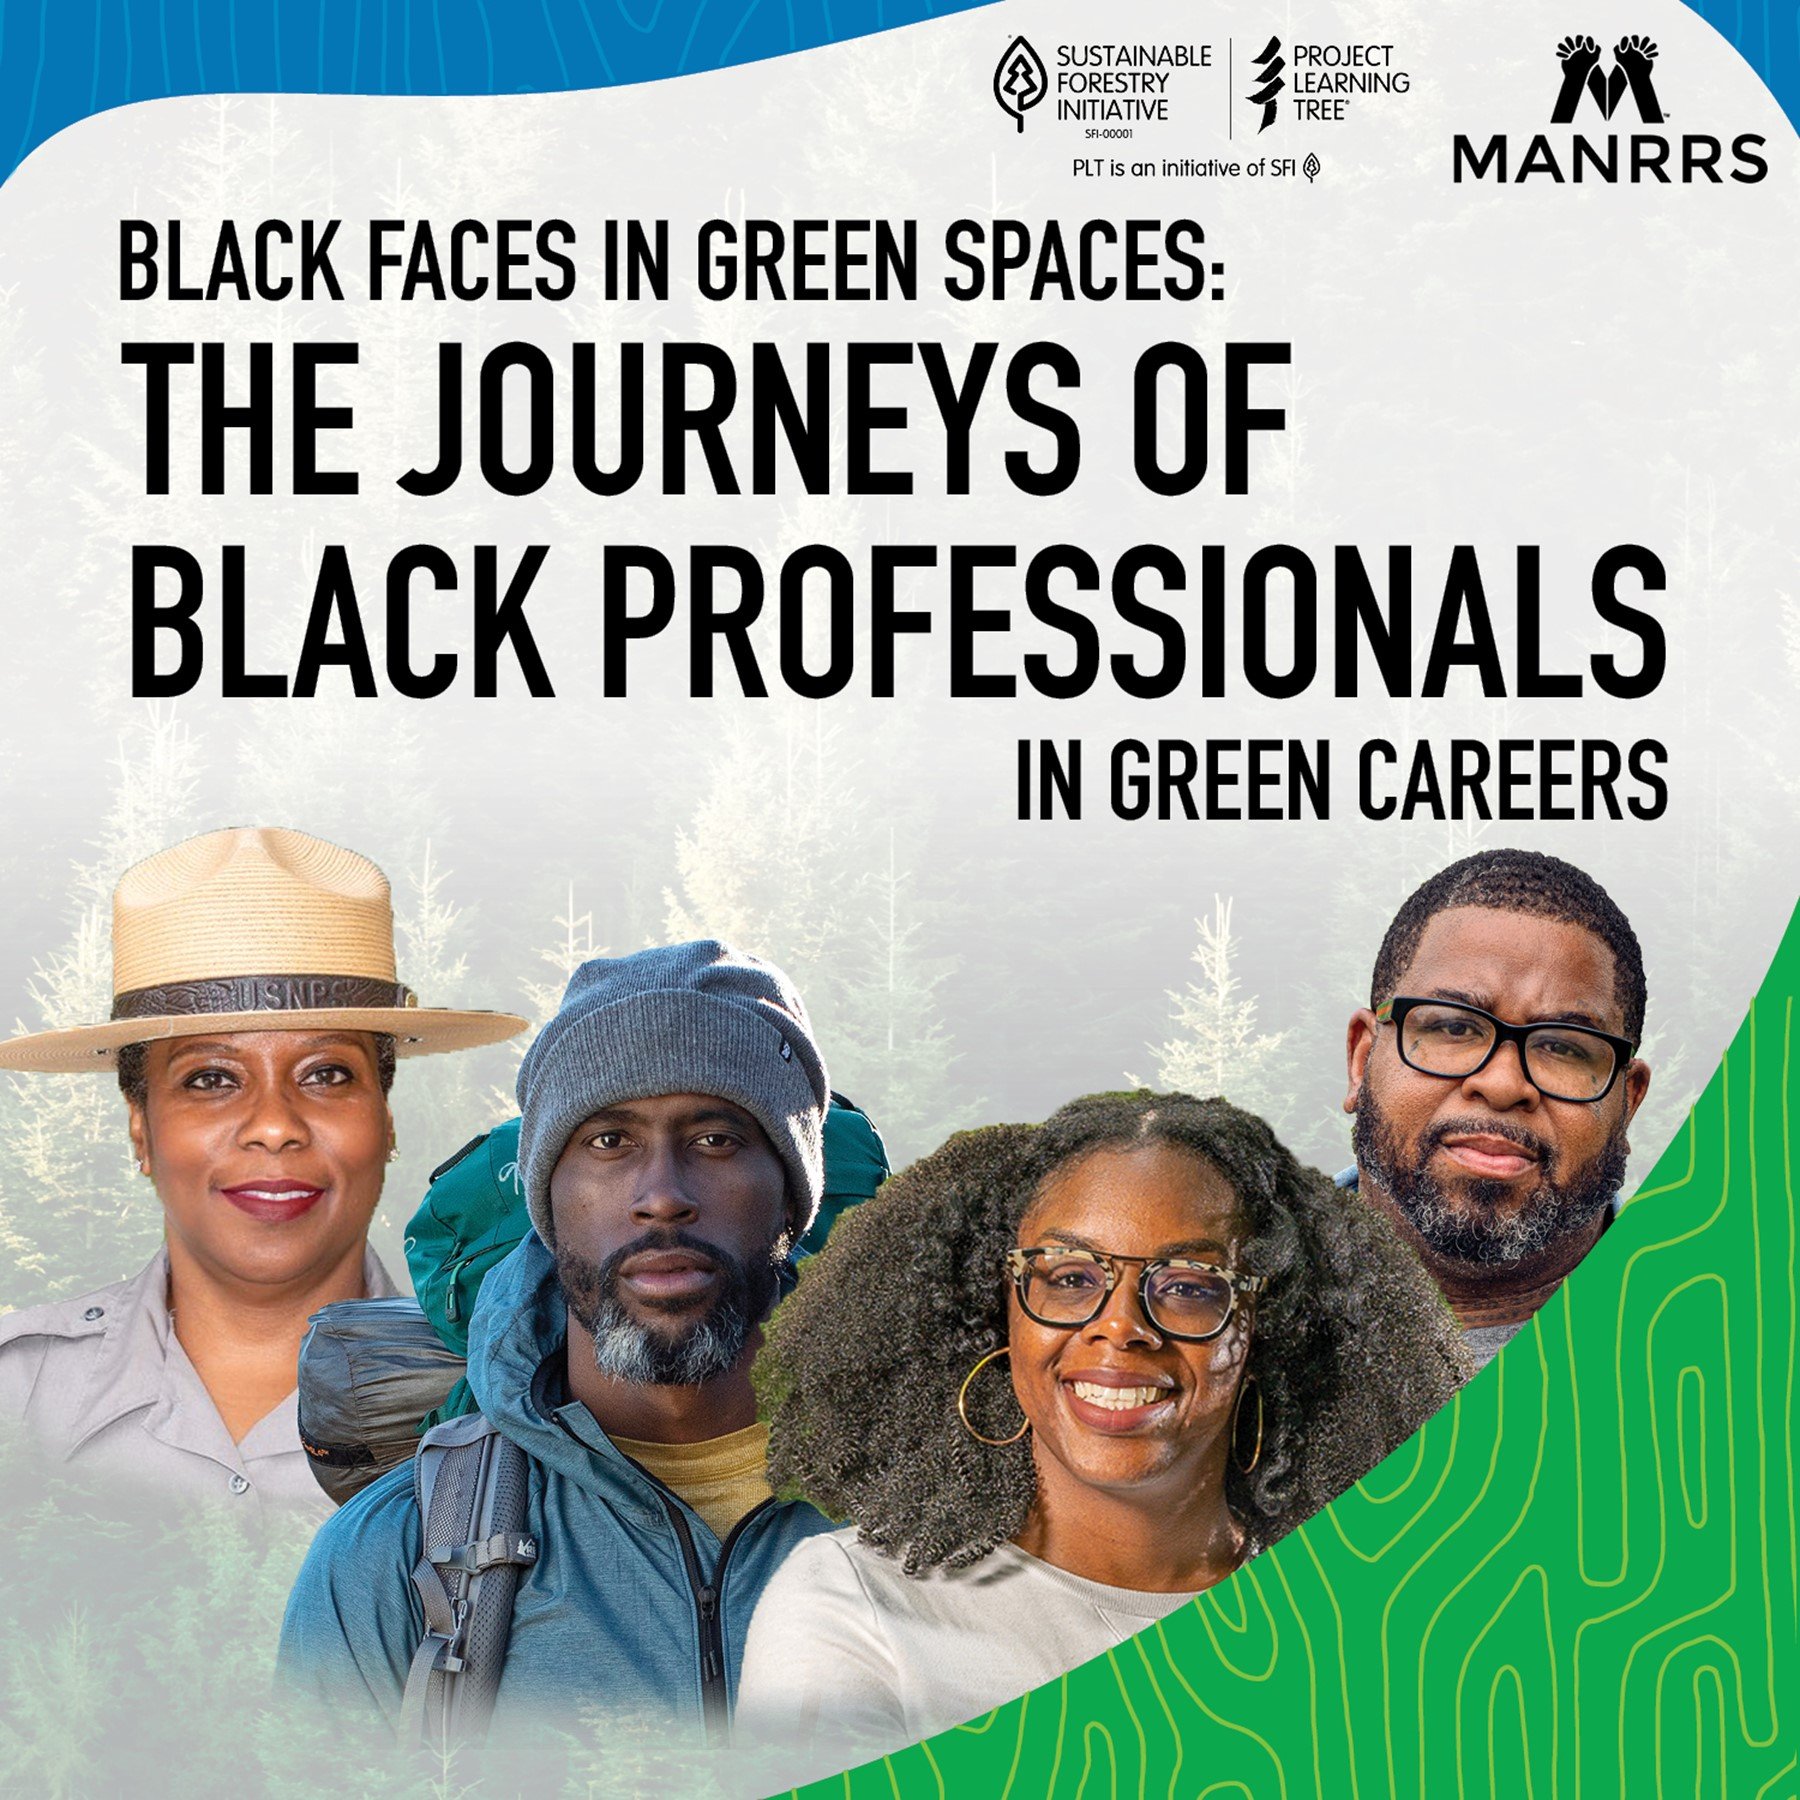 NEW PUBLICATION HELPS YOUNG BLACK AMERICANS EXPLORE CAREER PATHS IN THE FOREST AND CONSERVATION SECTOR